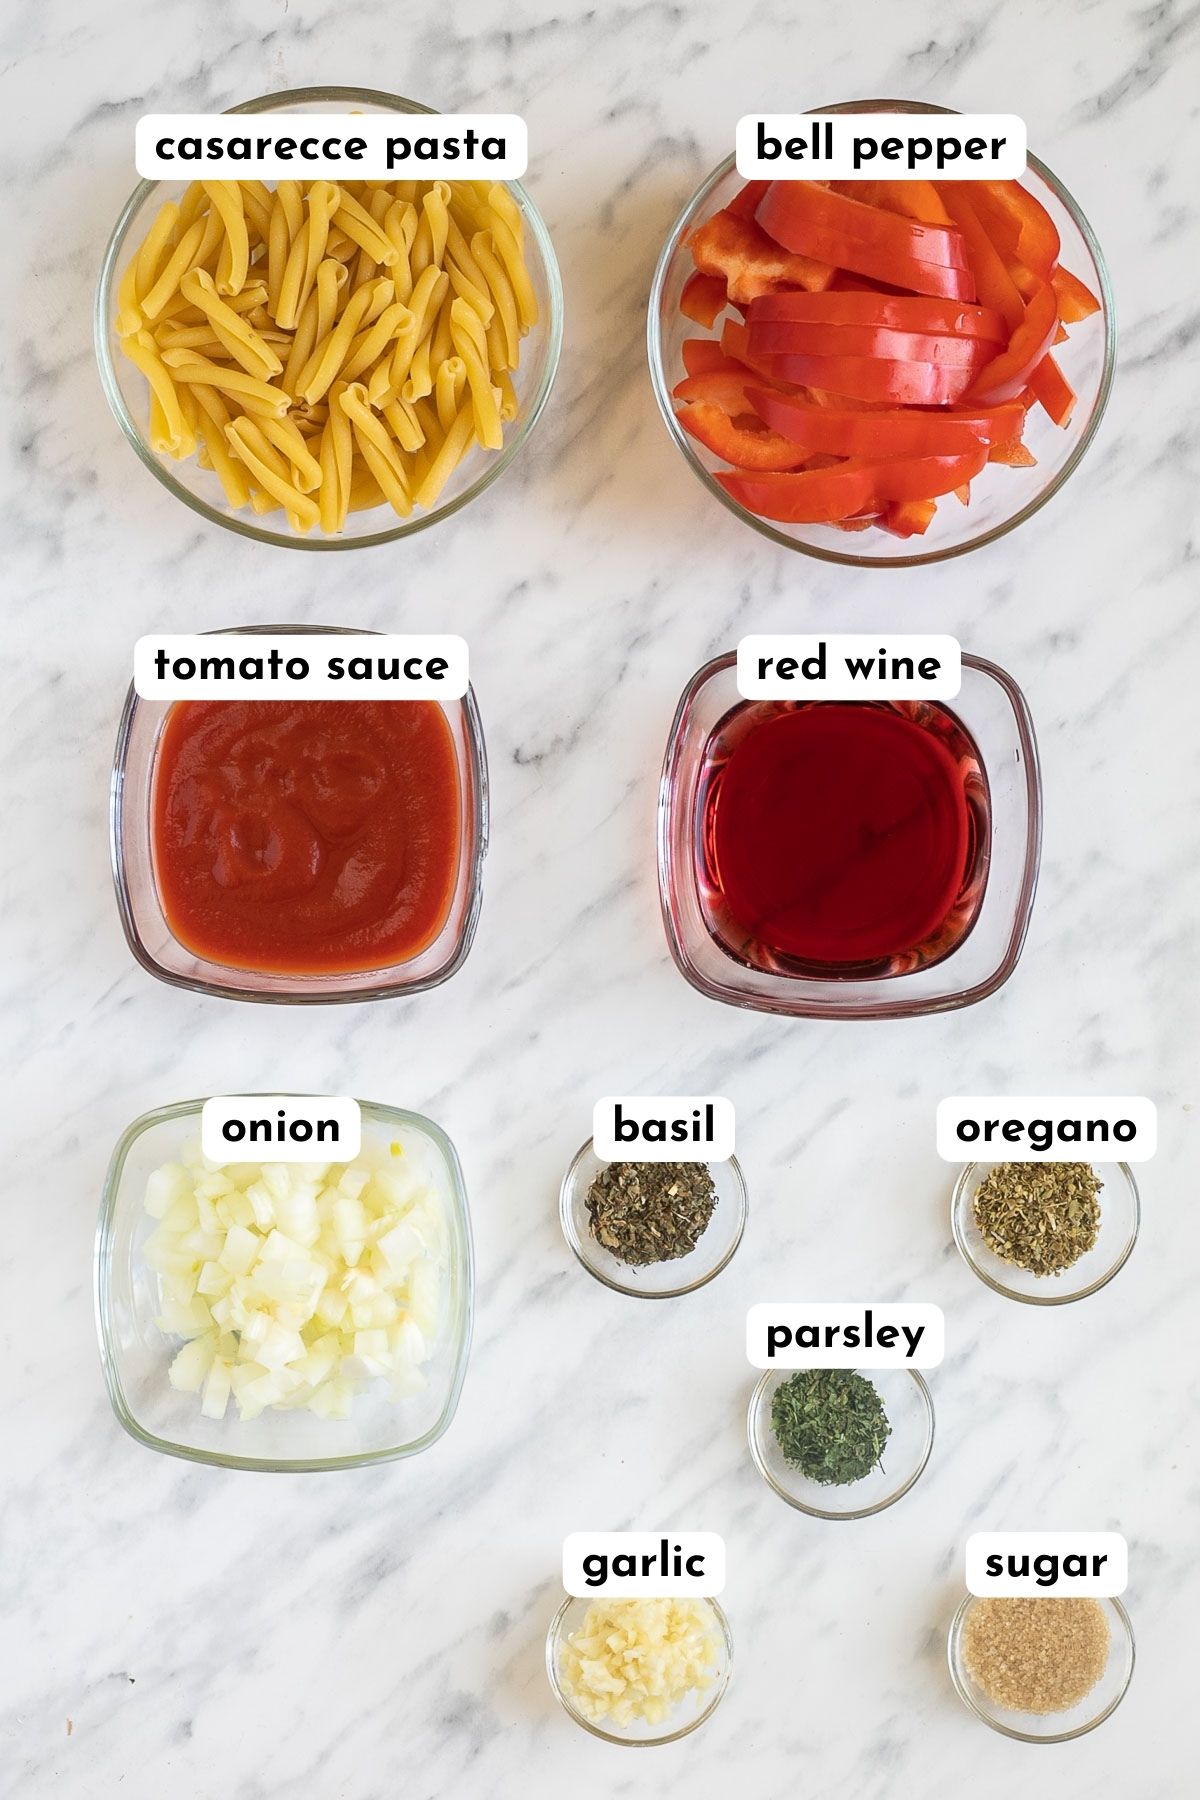 Ingredients of casarecce pasta with pepper sauce in small bowls like pasta, chopped bell pepper, tomato sauce, red wine, chopped onion, and different herbs and spices